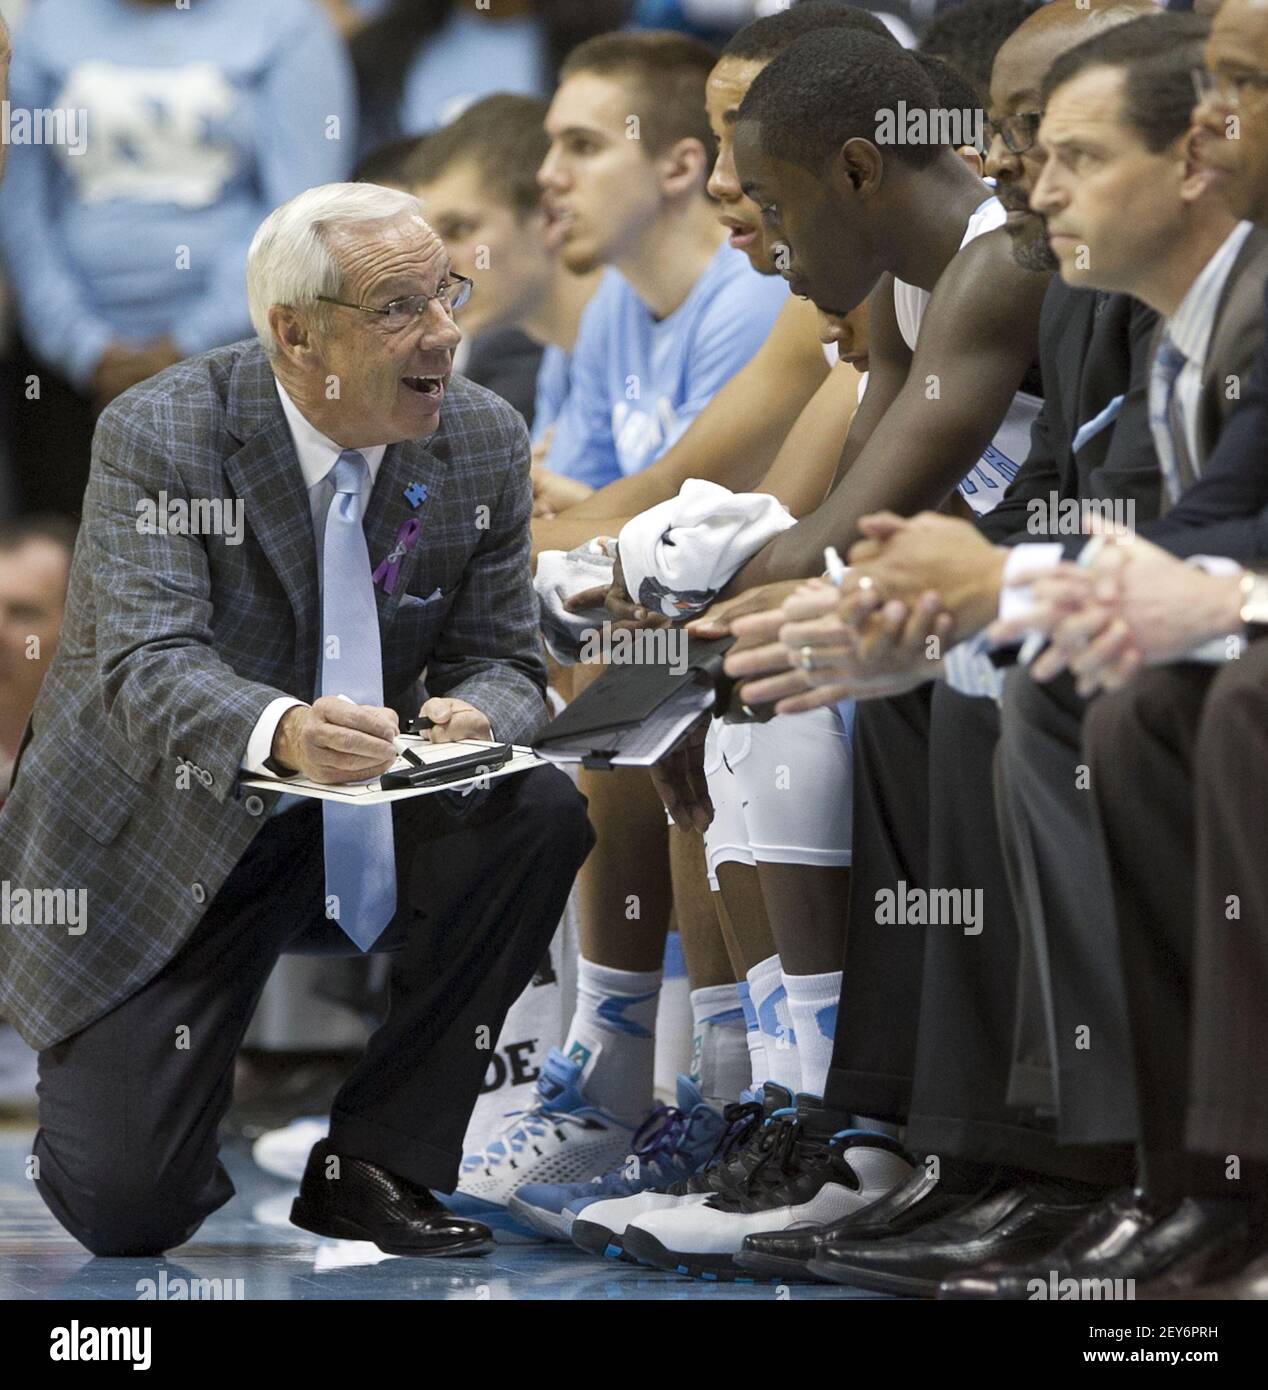 theo pinson bench